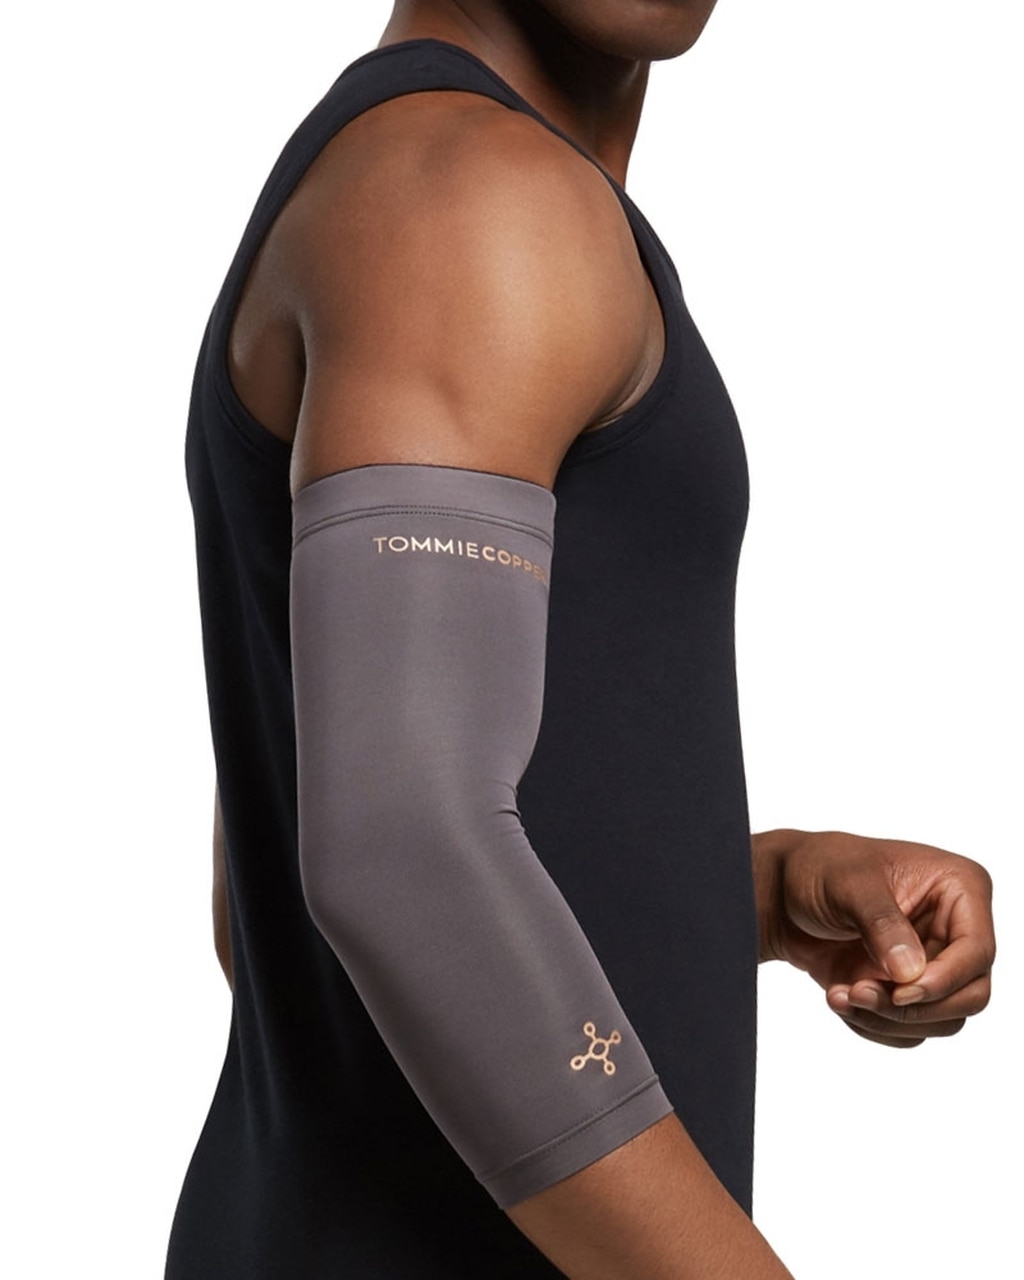 Copper Compression Arm Brace - Copper Infused Sleeve for Arms